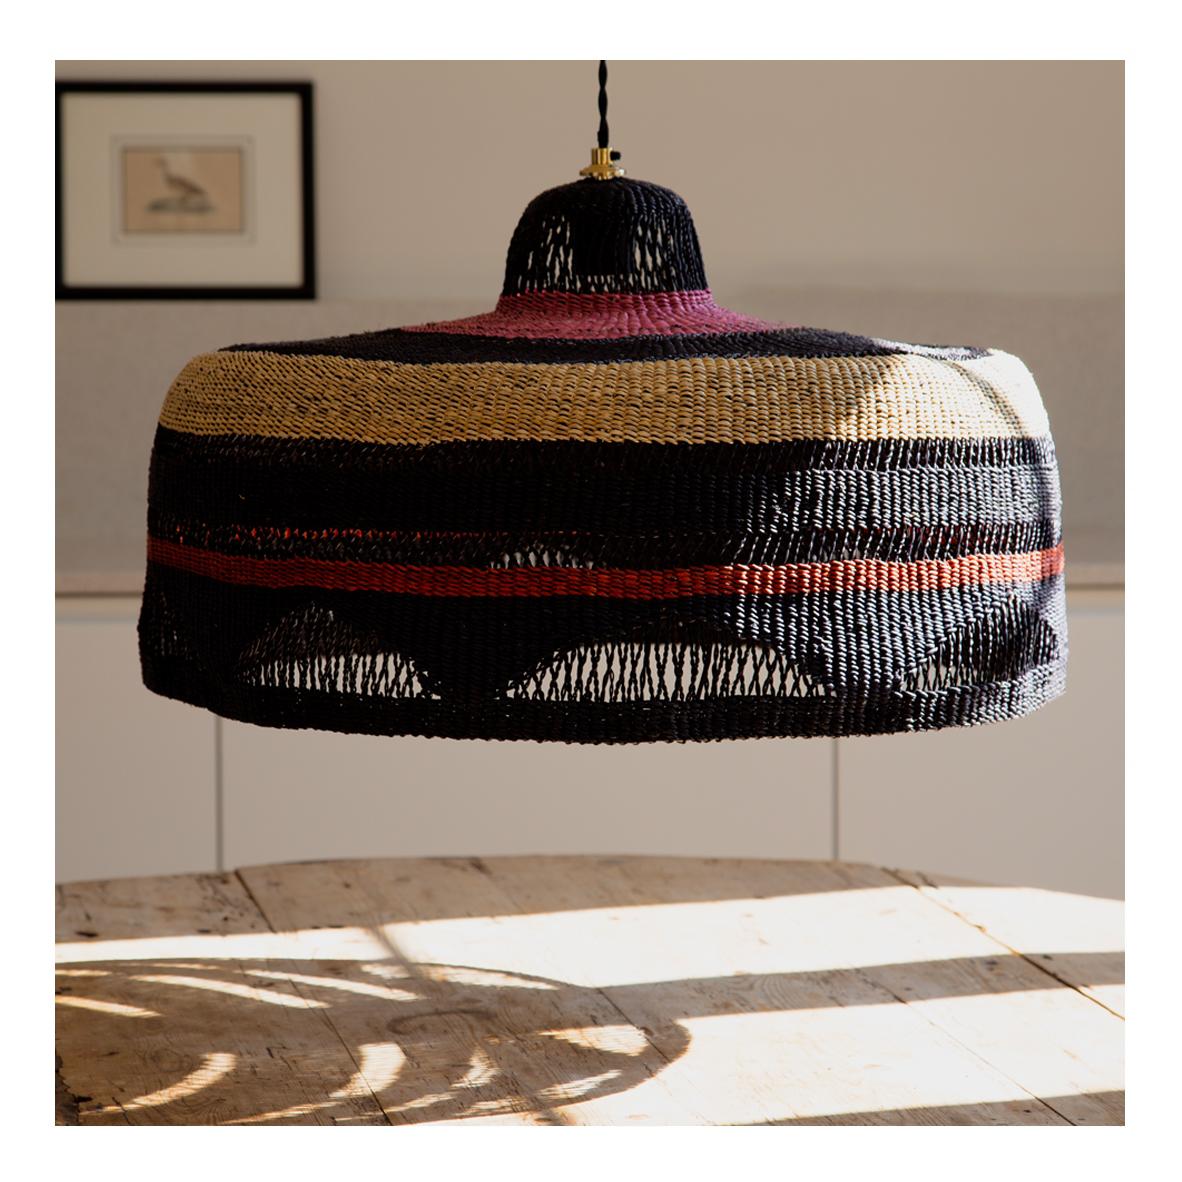 Ghanaian Contemporary Ethnic Pendant Lamp Patterned Handwoven Straw Terracotta